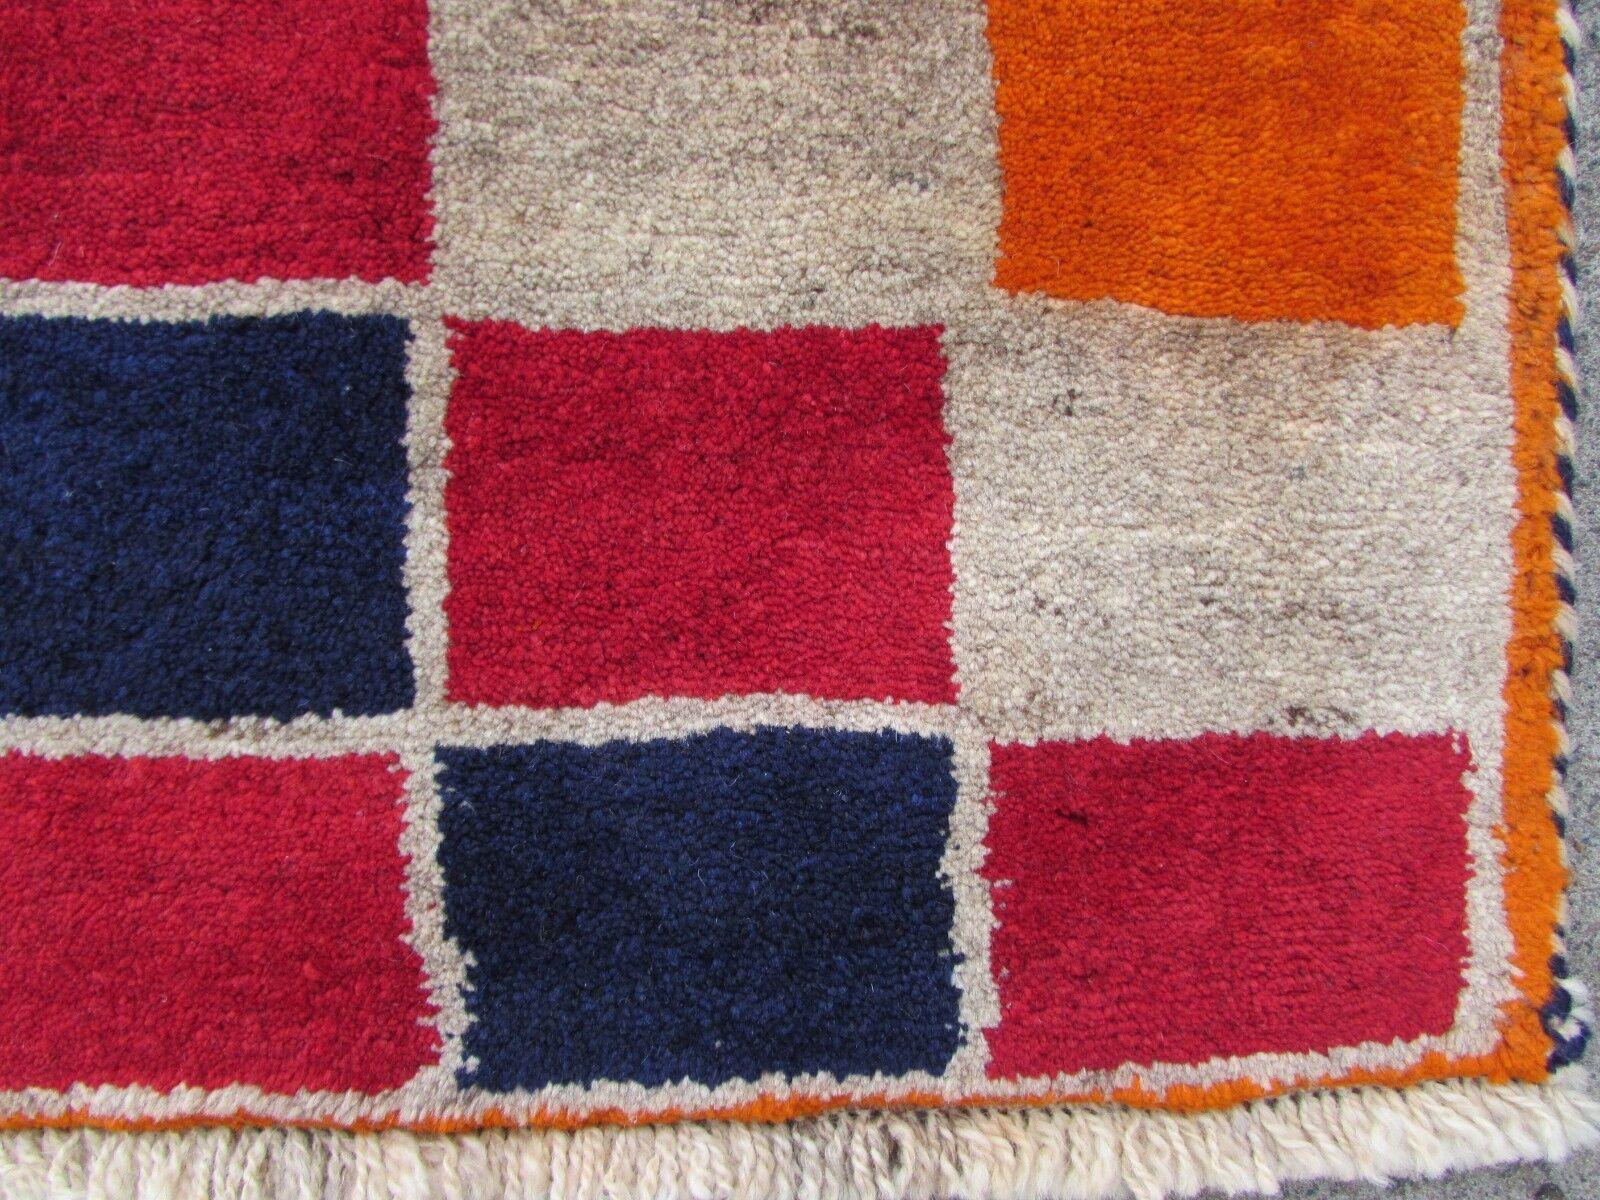 Handmade Vintage Persian Style Gabbeh Rug 3.4' x 5.9', 1970s, 1Q44 For Sale 5